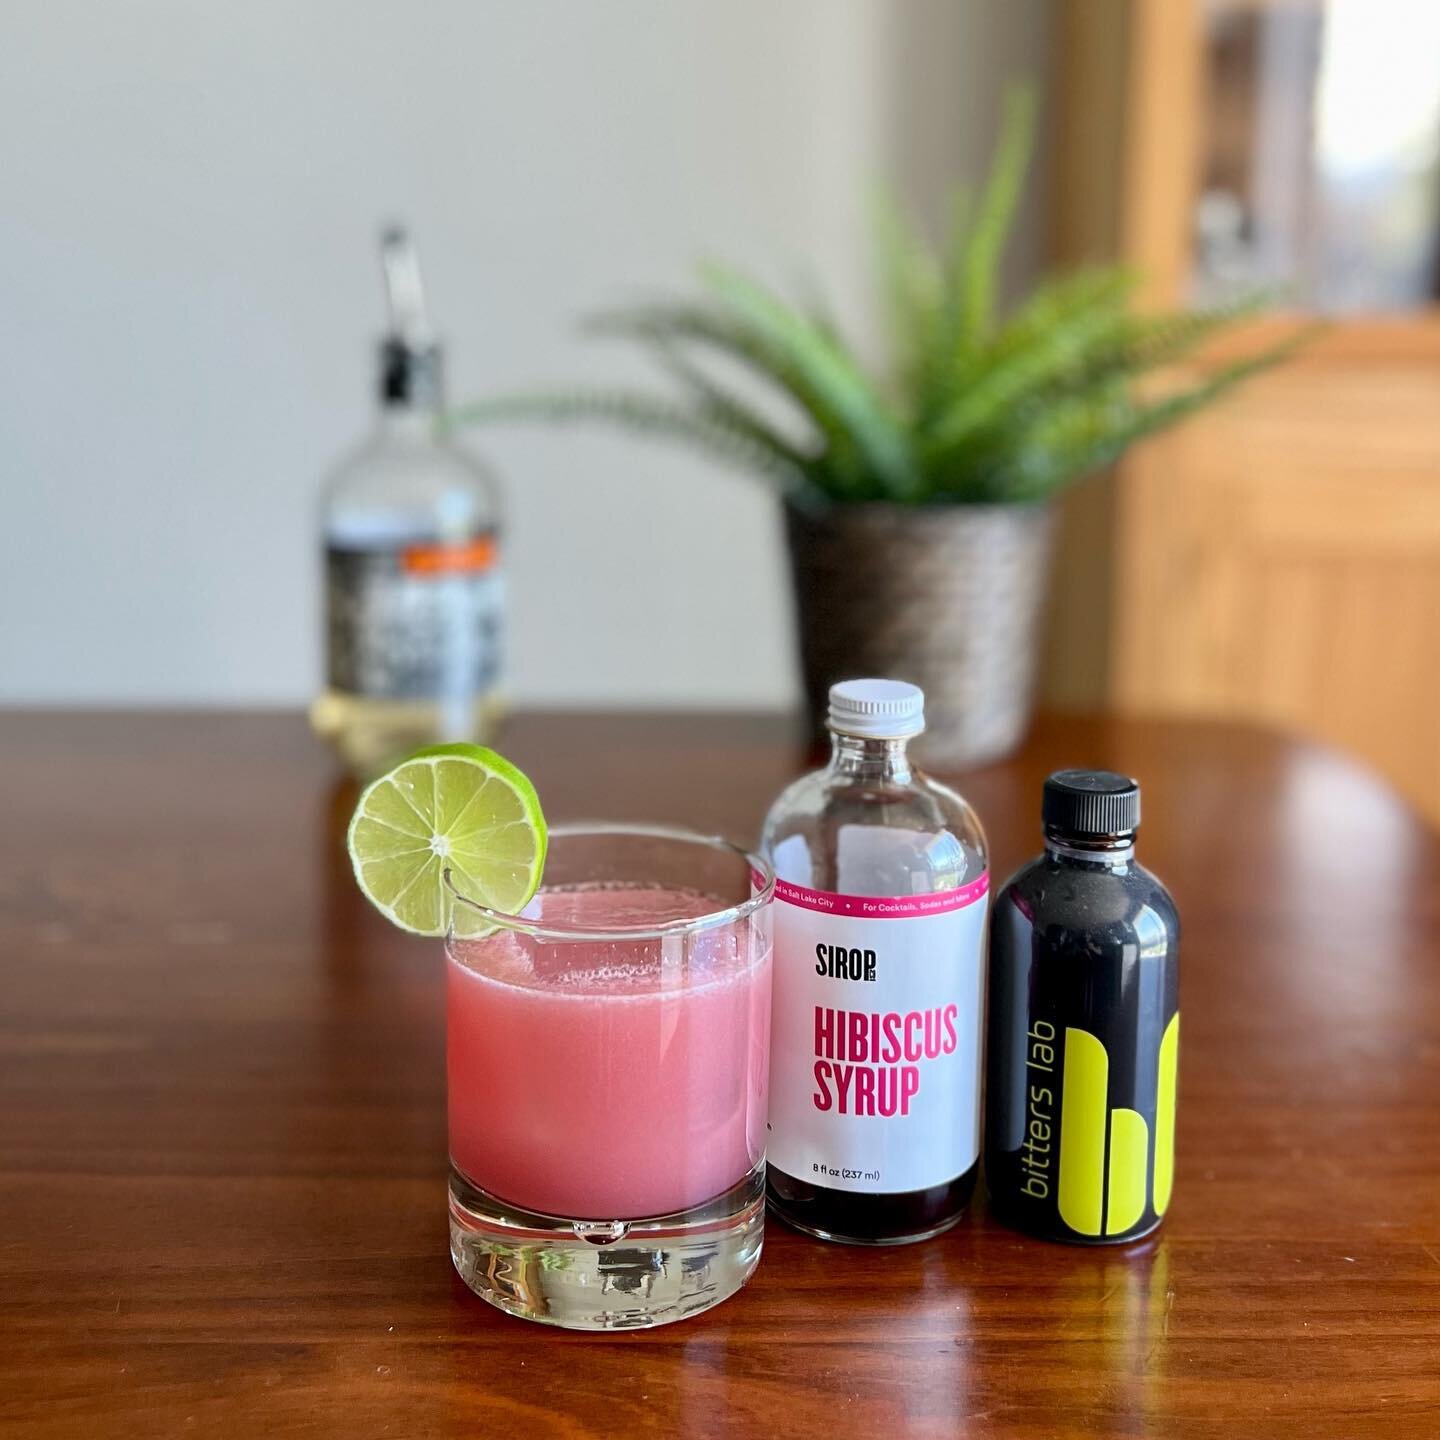 Happy Cinco De Mayo! We hope you enjoy today with your favorite drinks with family and friends. Here&rsquo;s what we&rsquo;ll be drinking tonight!

Hibiscus Margarita
2oz @espolontequila Tequila
1oz @sirop_co hibiscus syrup
1oz fresh lime juice
3 das